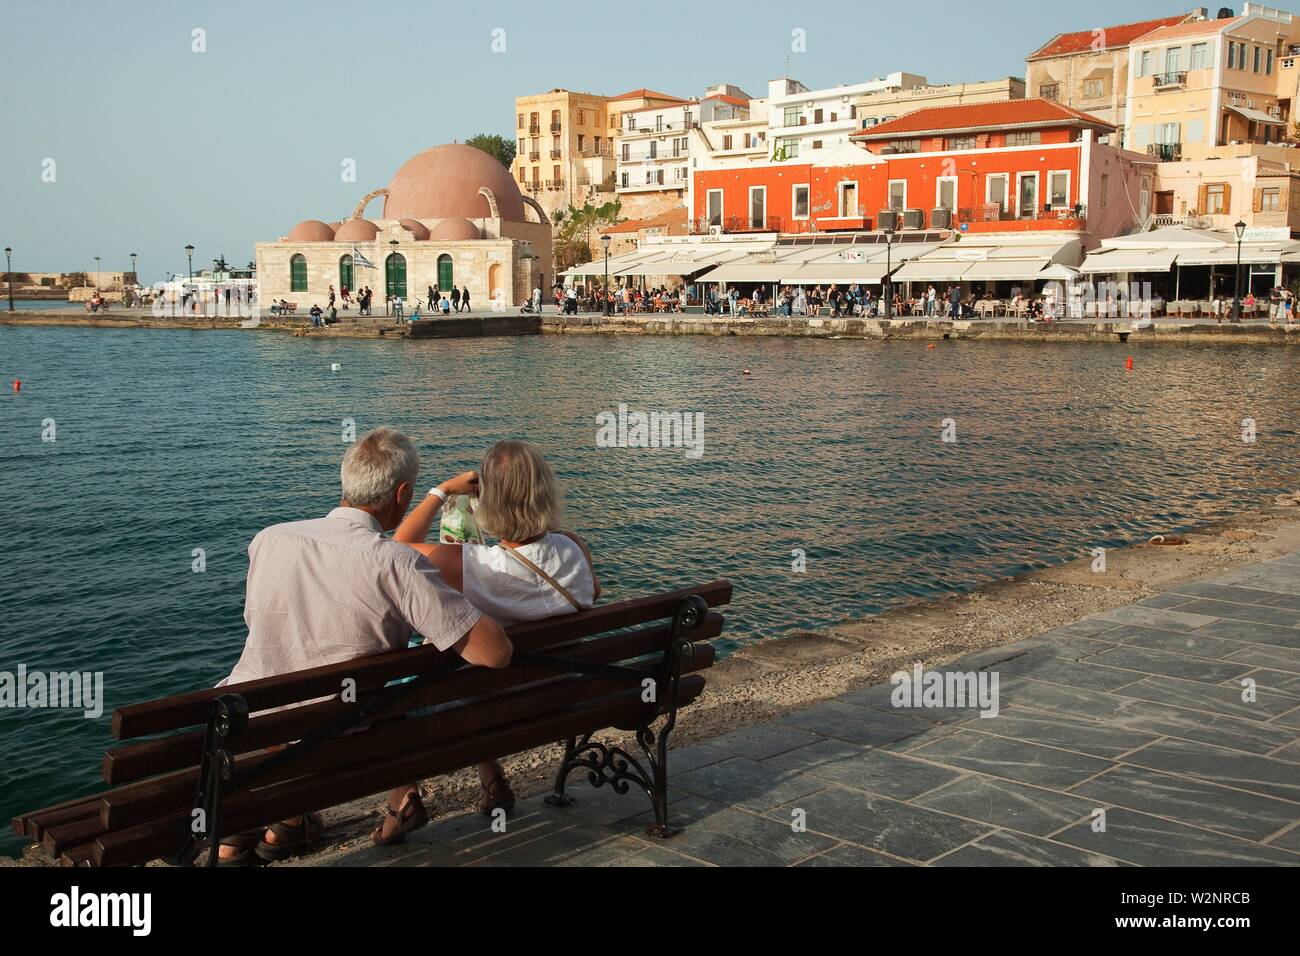 Couple sitting on a bench with the Gyali Tzamisi (also known as Kucuk Hasan Pasha) mosque in the background at the Venetian harbor of Chania, Crete, Stock Photo